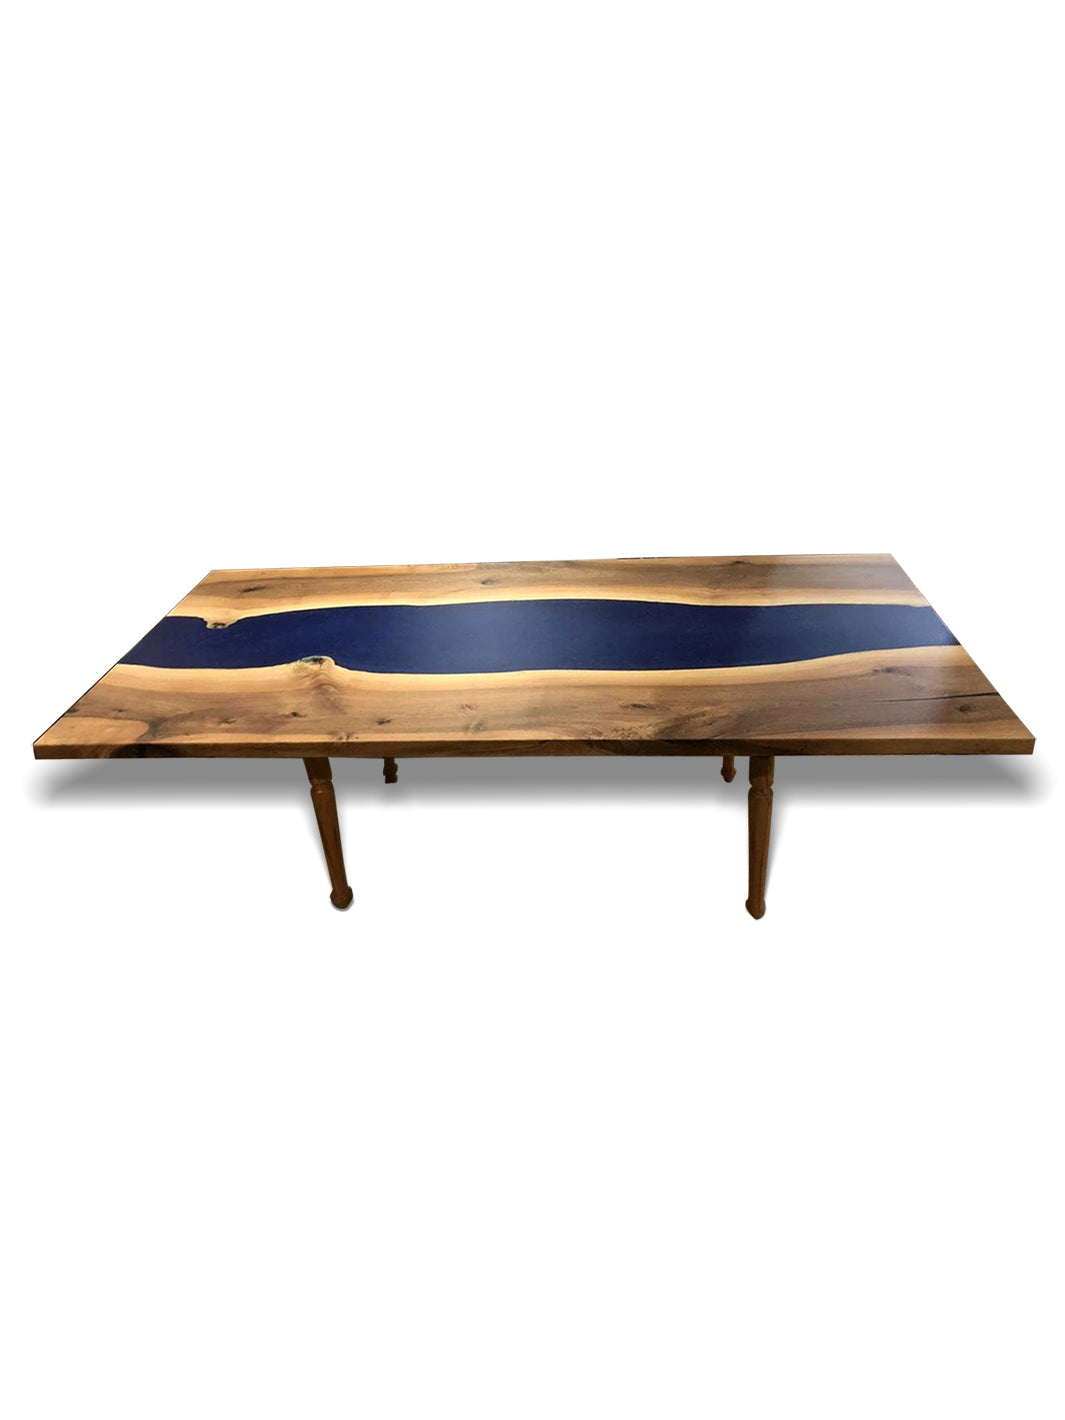 Handcrafted Walnut Blue Epoxy River Resin Dining Table Harden Tables 